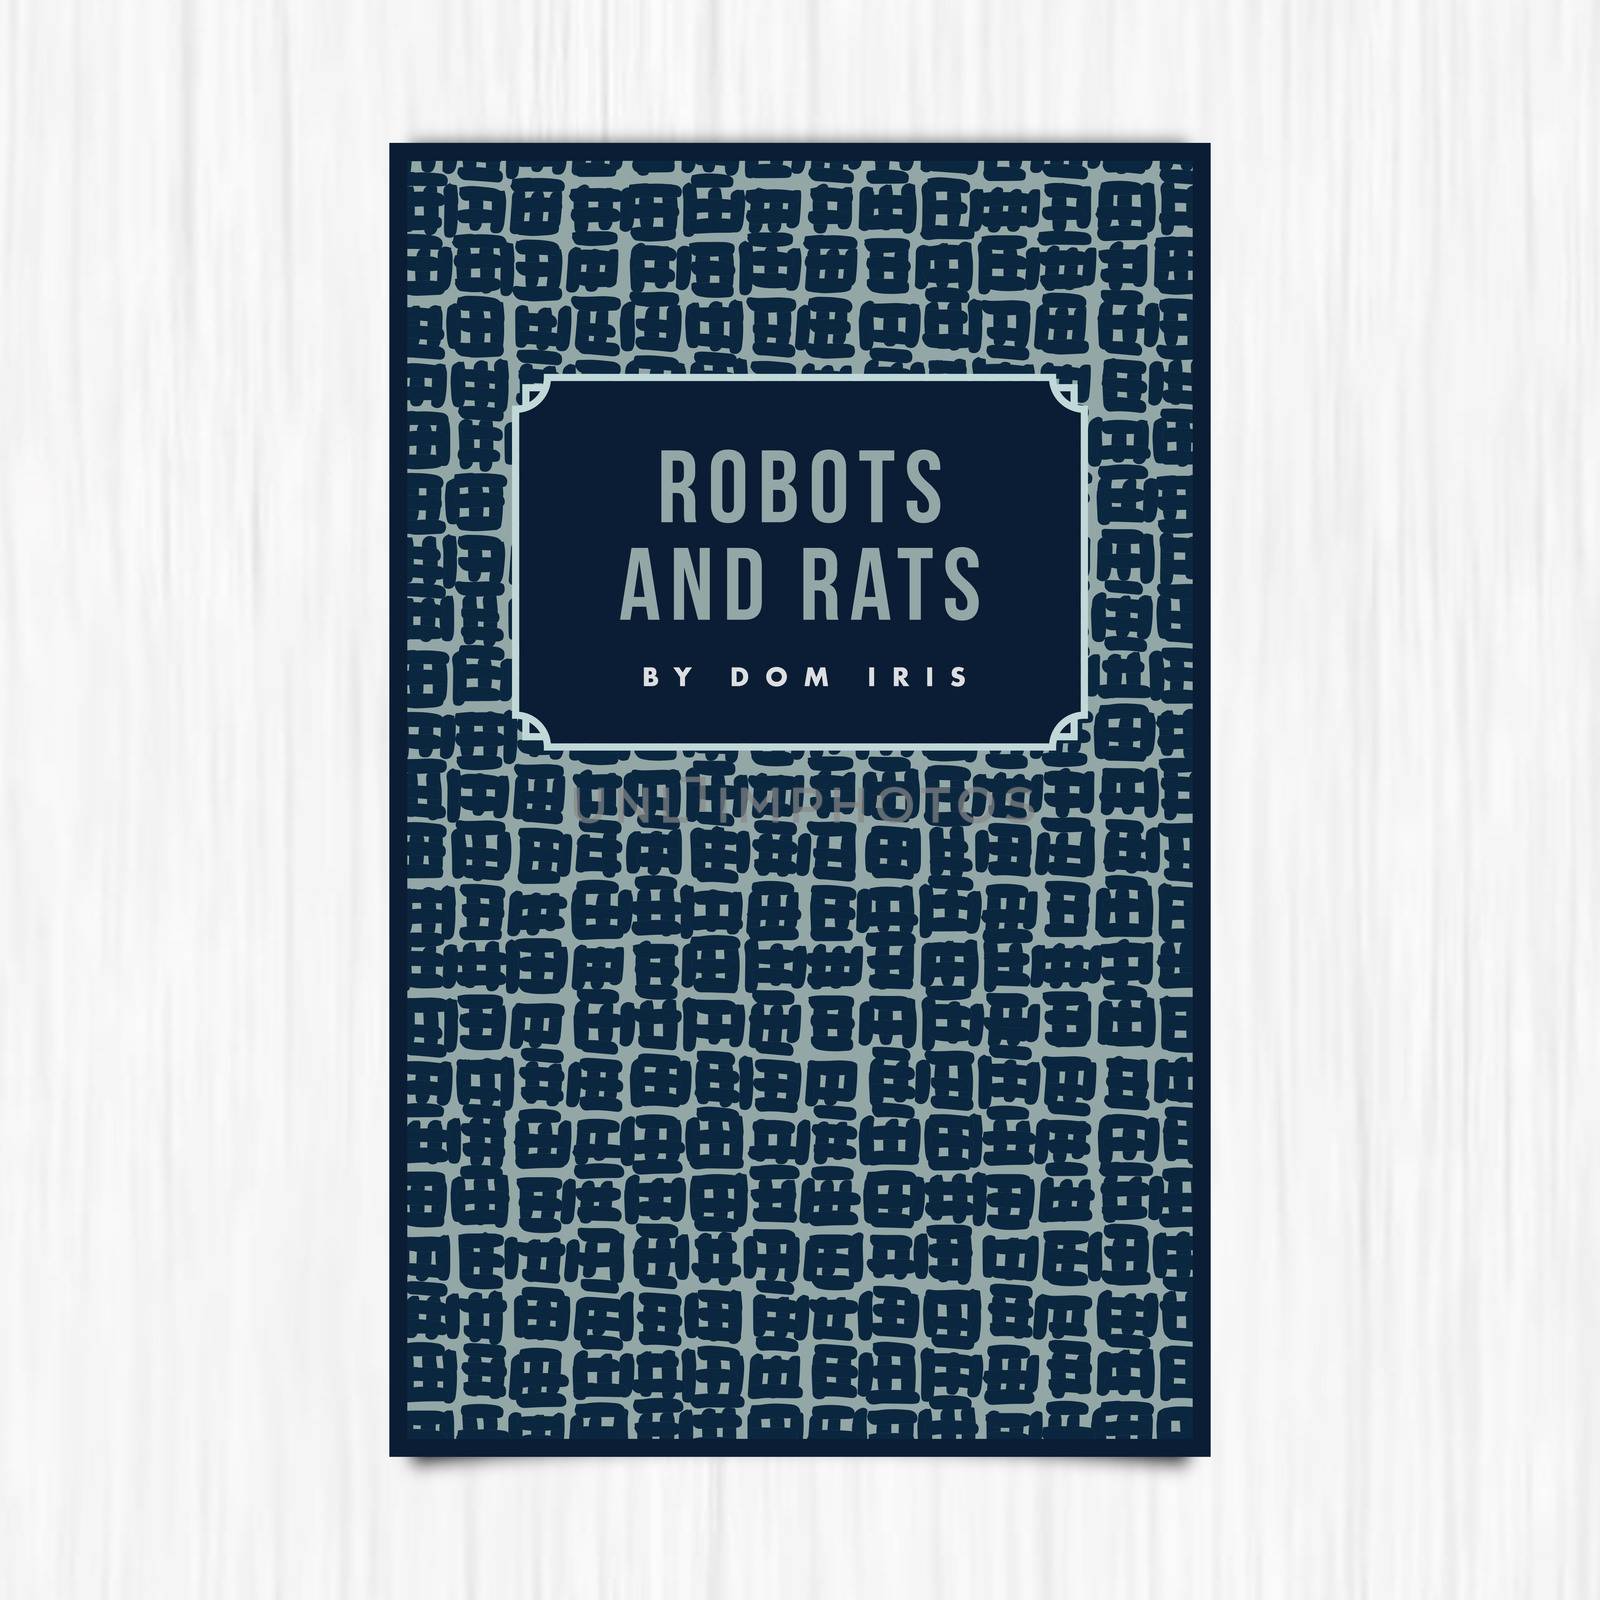 Vector of novel cover with robots and rats text against white background